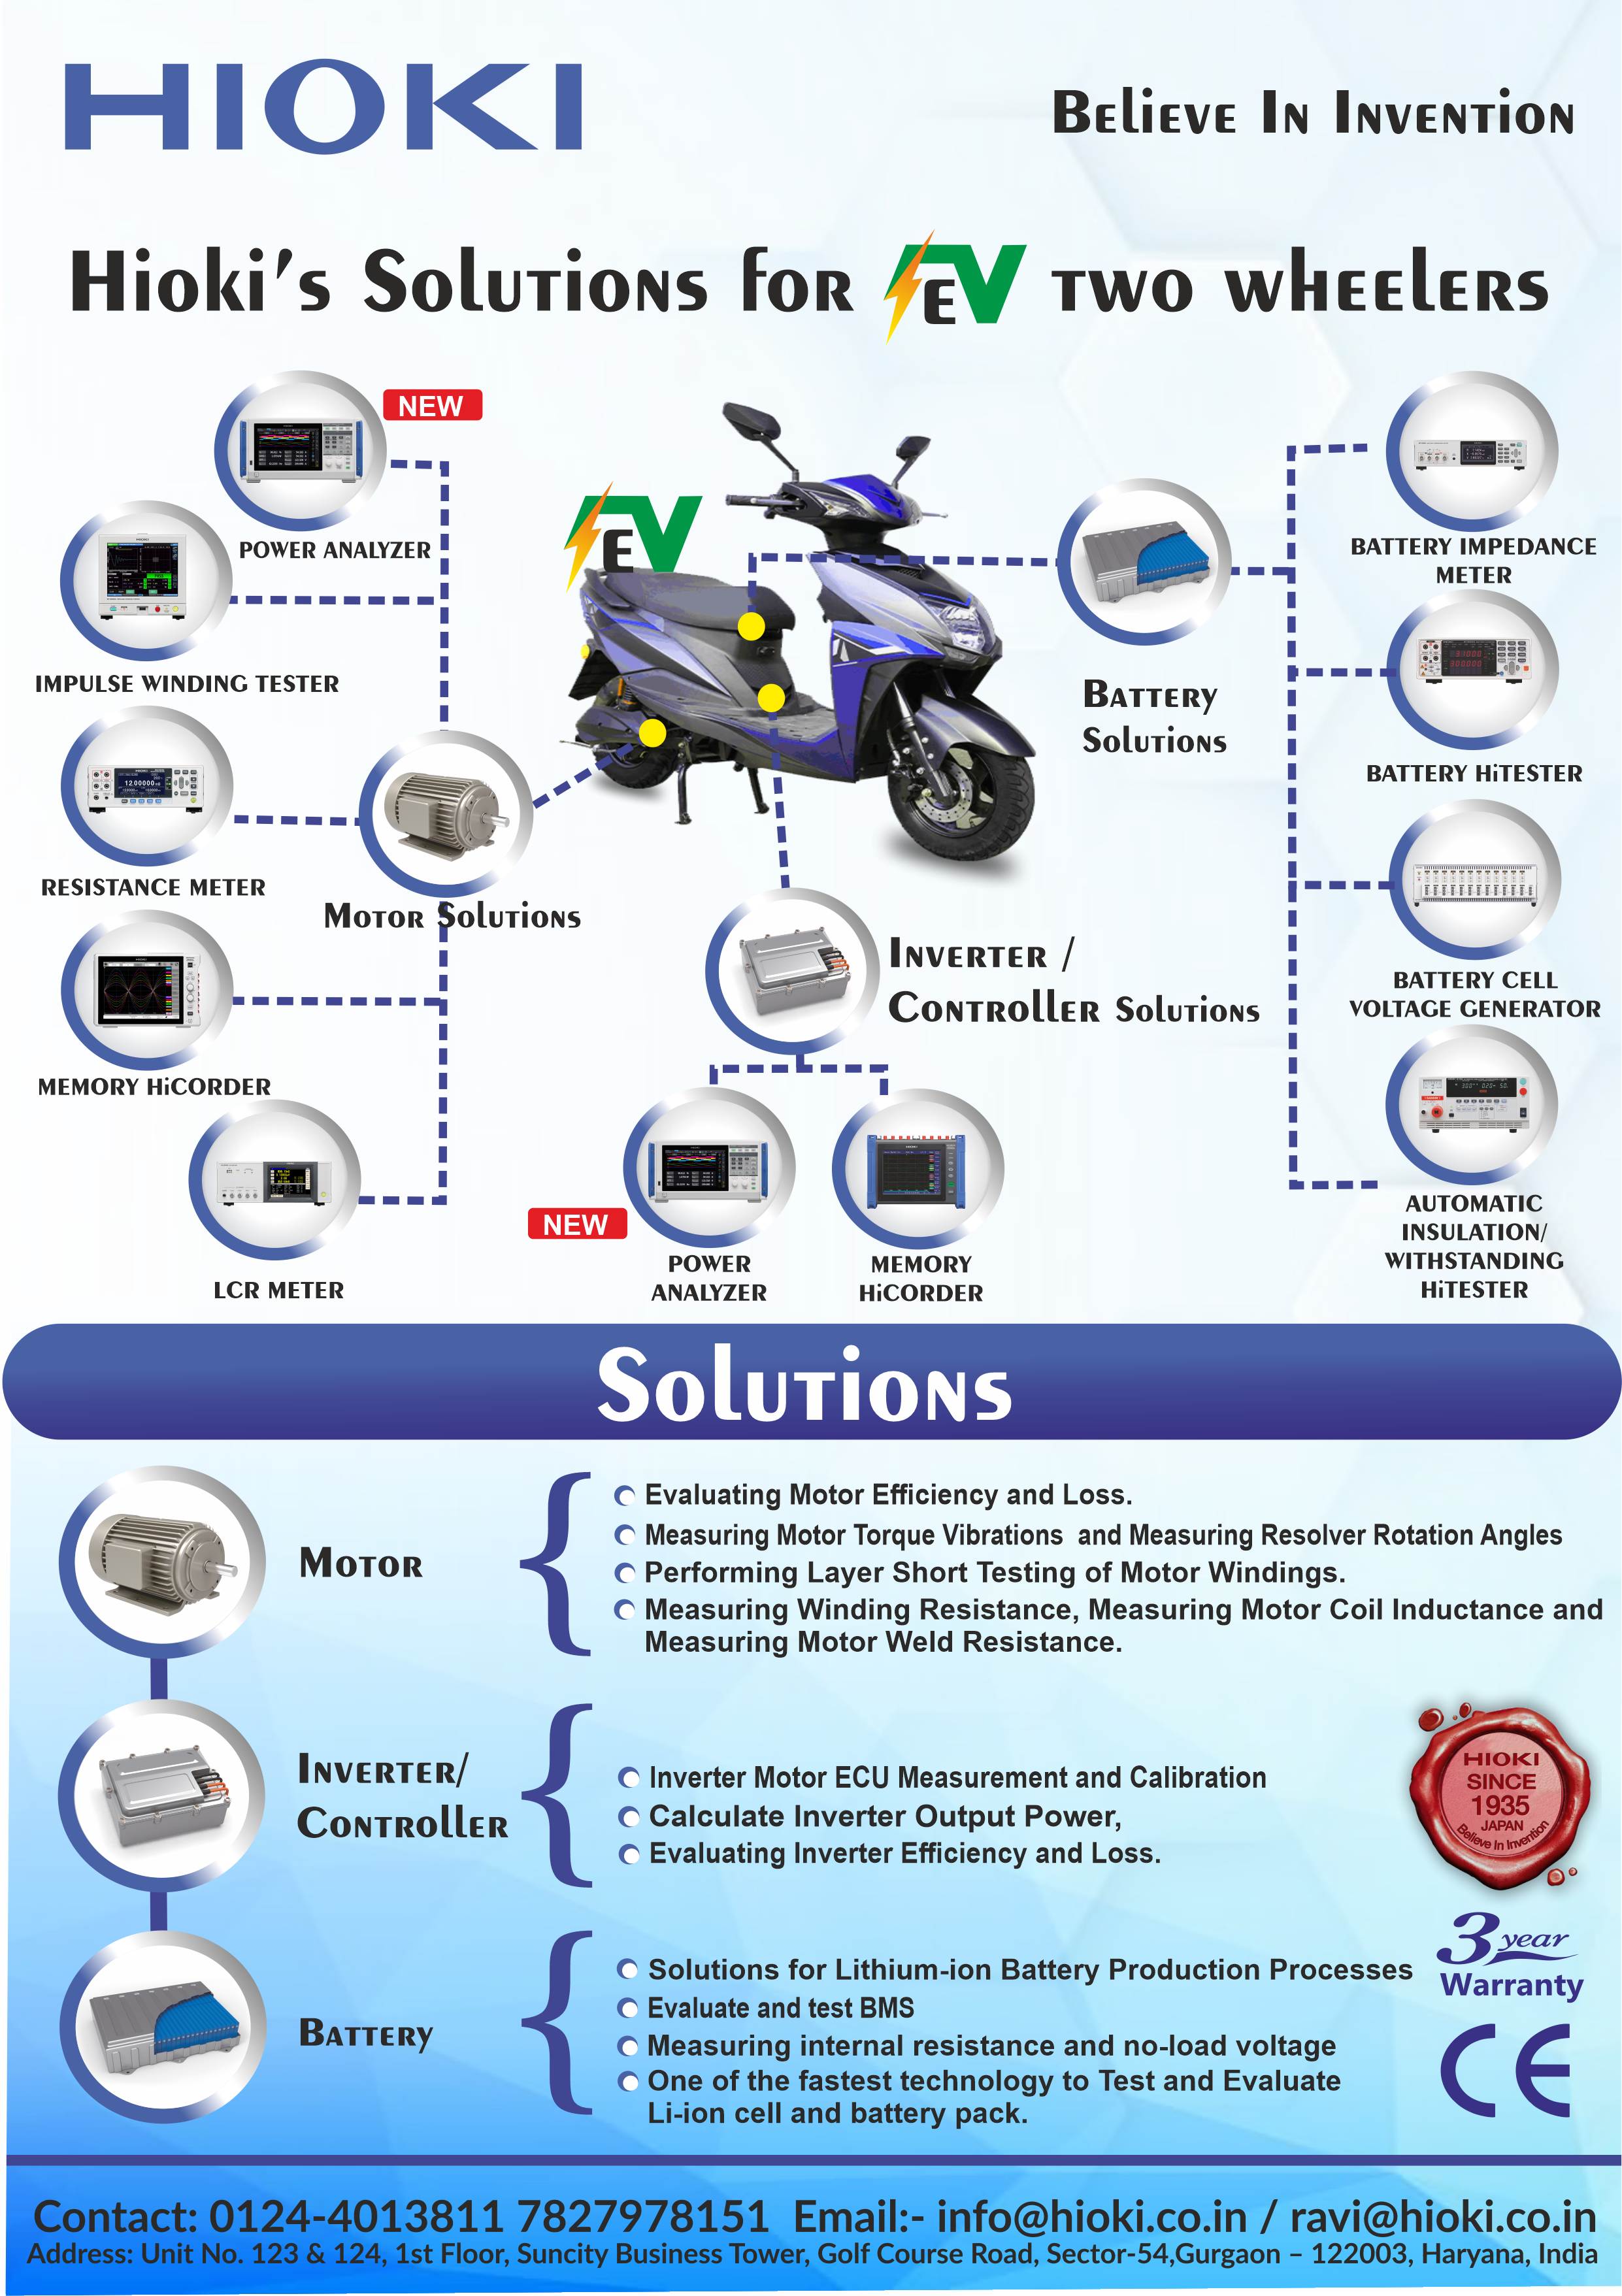 Hioki Solutions for ev two-wheelers.